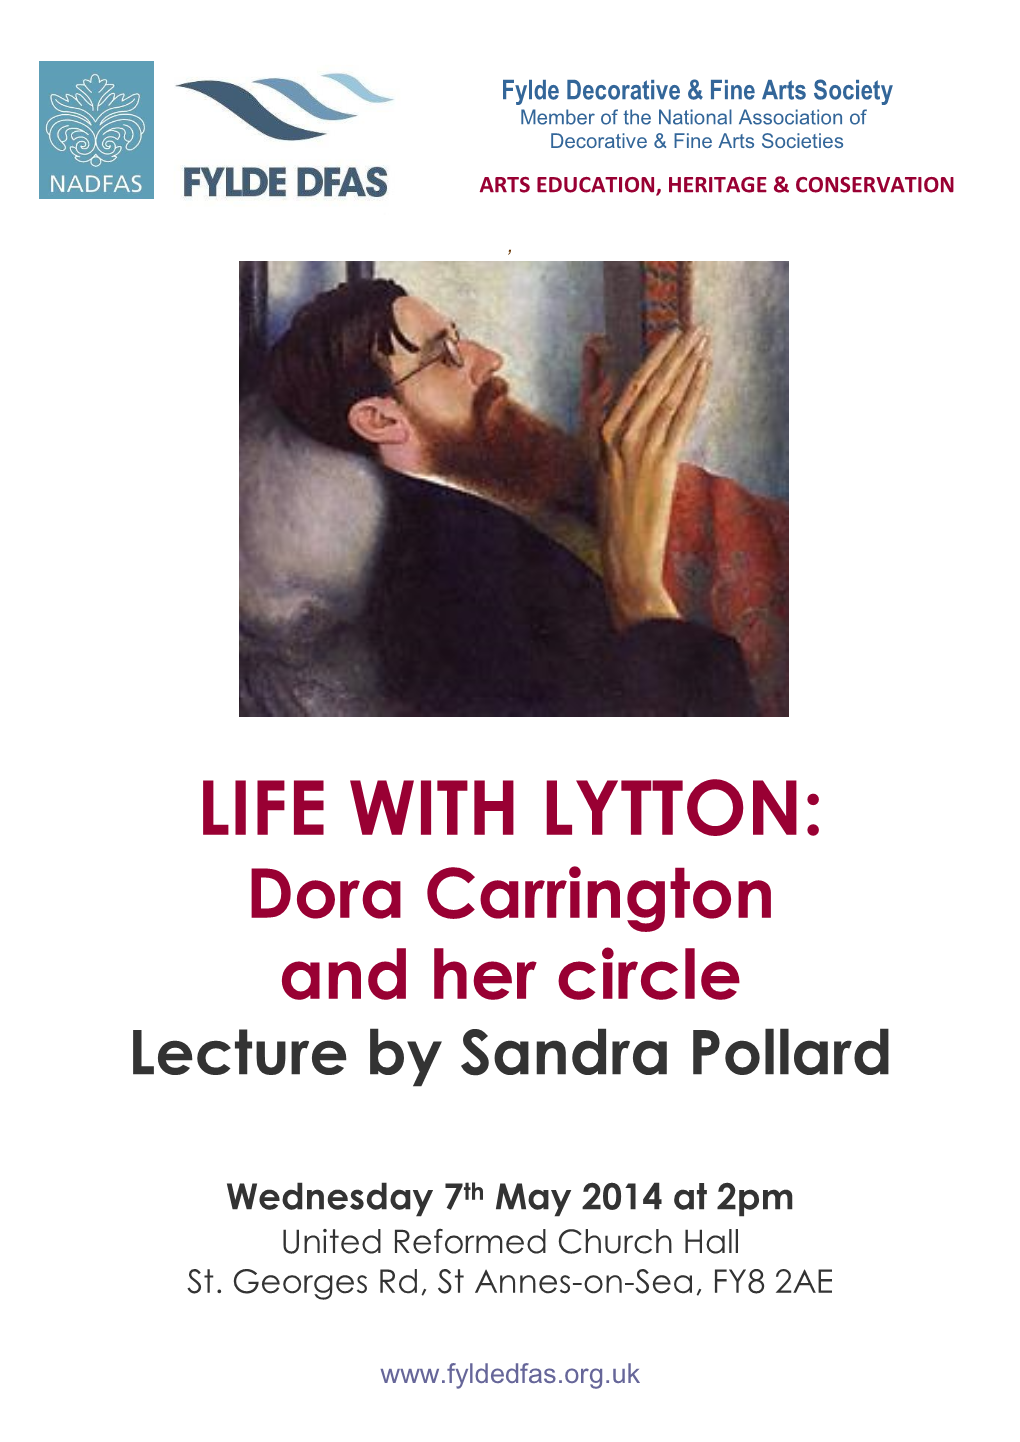 LIFE with LYTTON: Dora Carrington and Her Circle Lecture by Sandra Pollard